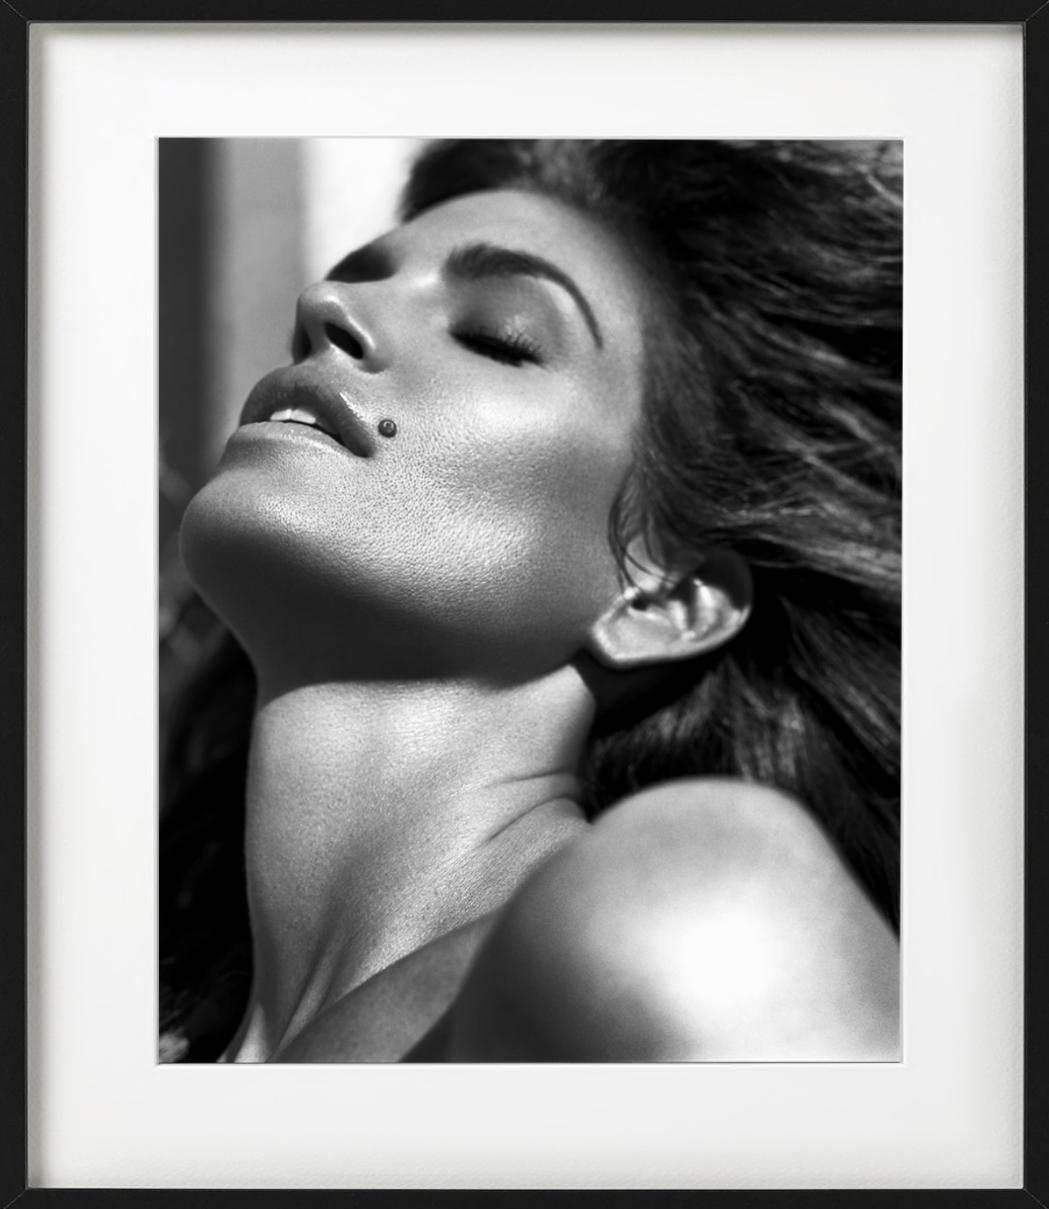 Cindy Crawford - black-and-white sensual portrait of the supermodel leaning back - Photograph by Vincent Peters